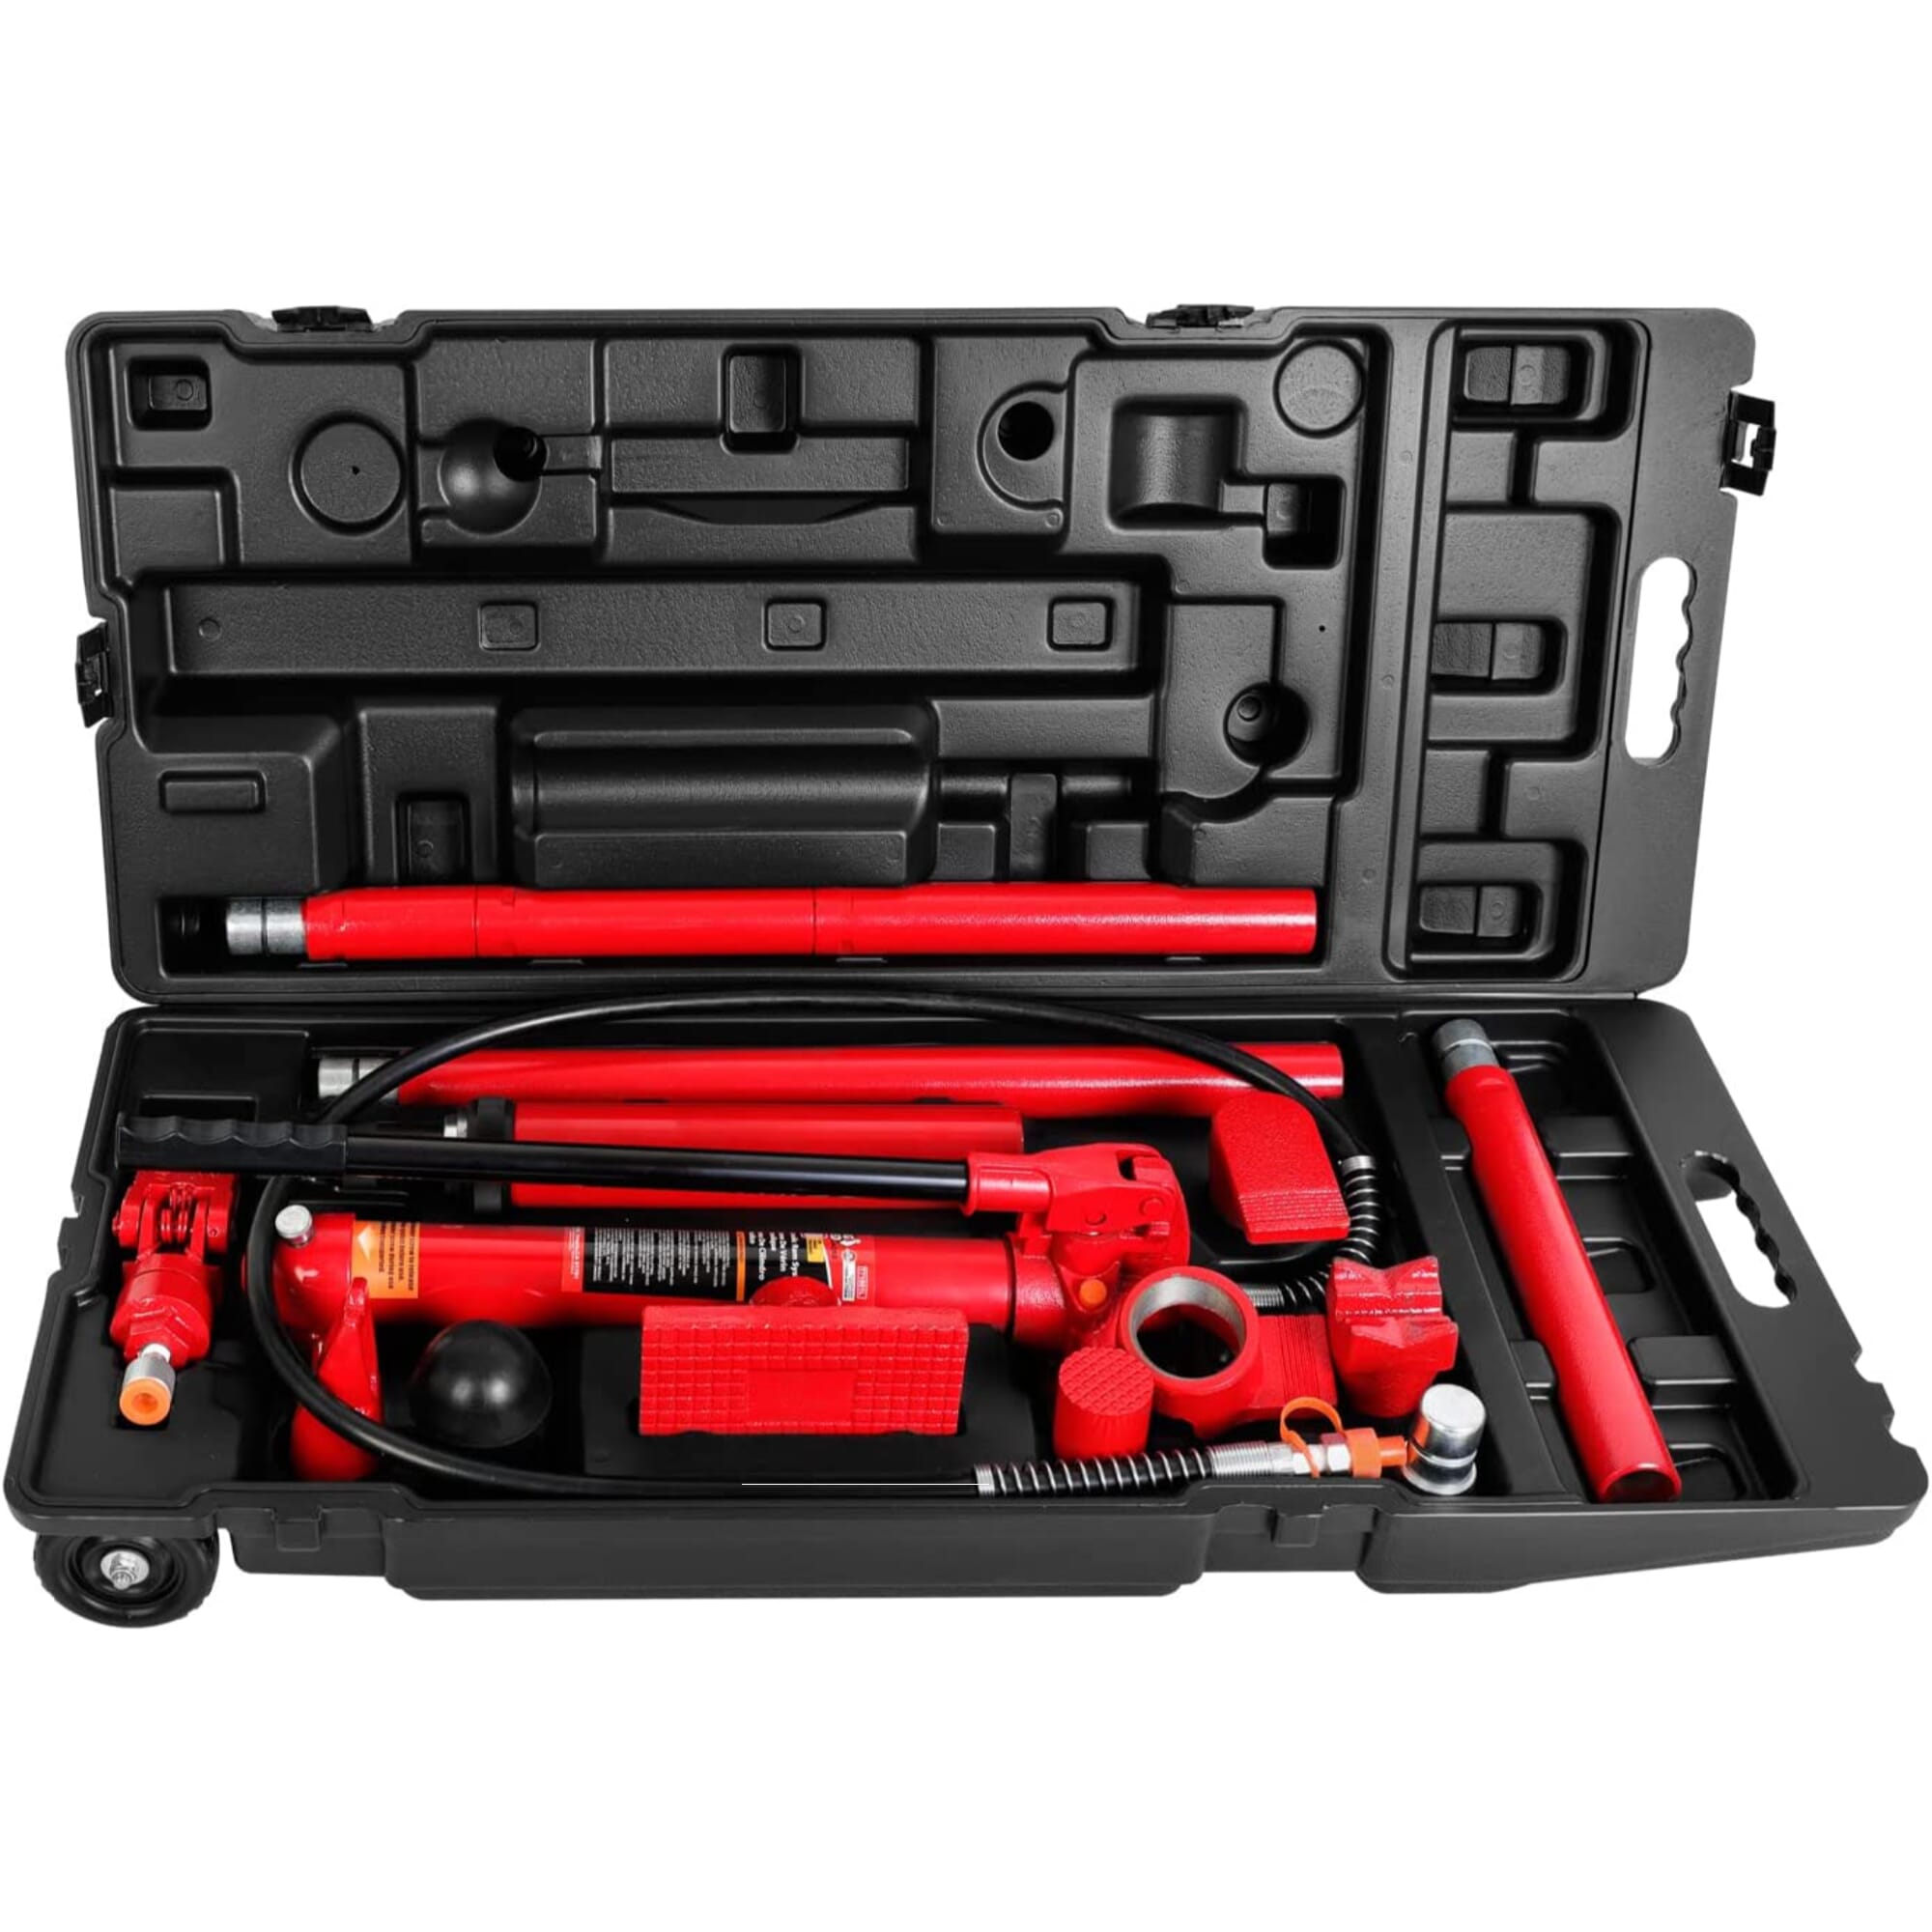 Torin - Big Red T71002L Hydraulic Portable Power Kit 10 Ton In Blow Mould Case With Wheels